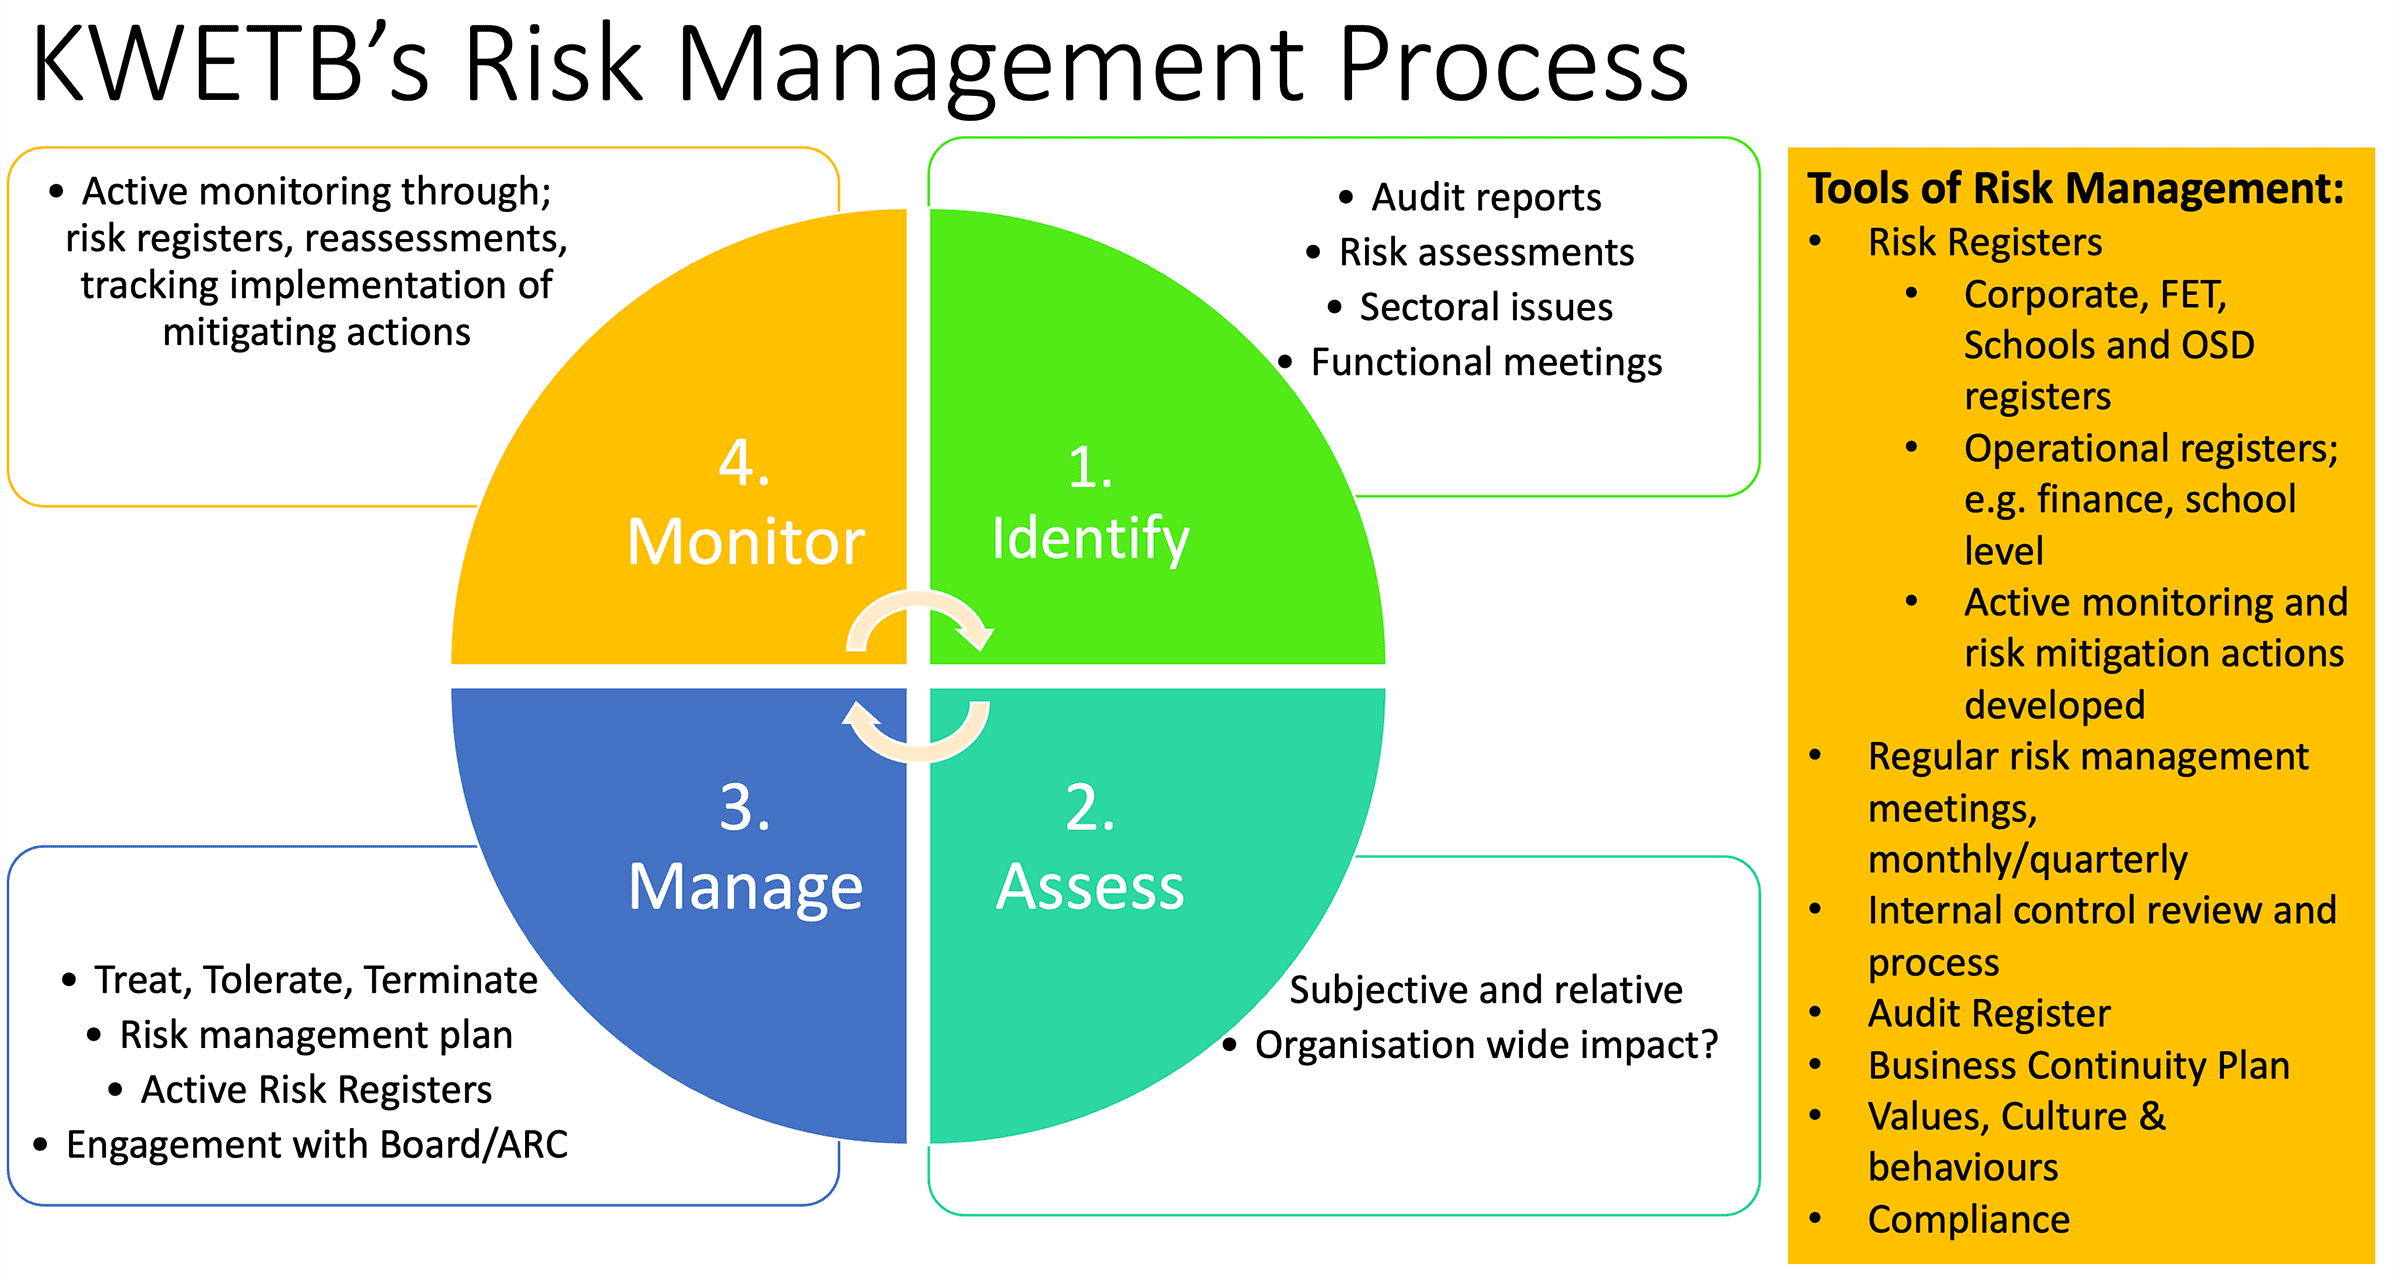 KWETB's Risk Management Process graphic of stages and tools used to manage risk 